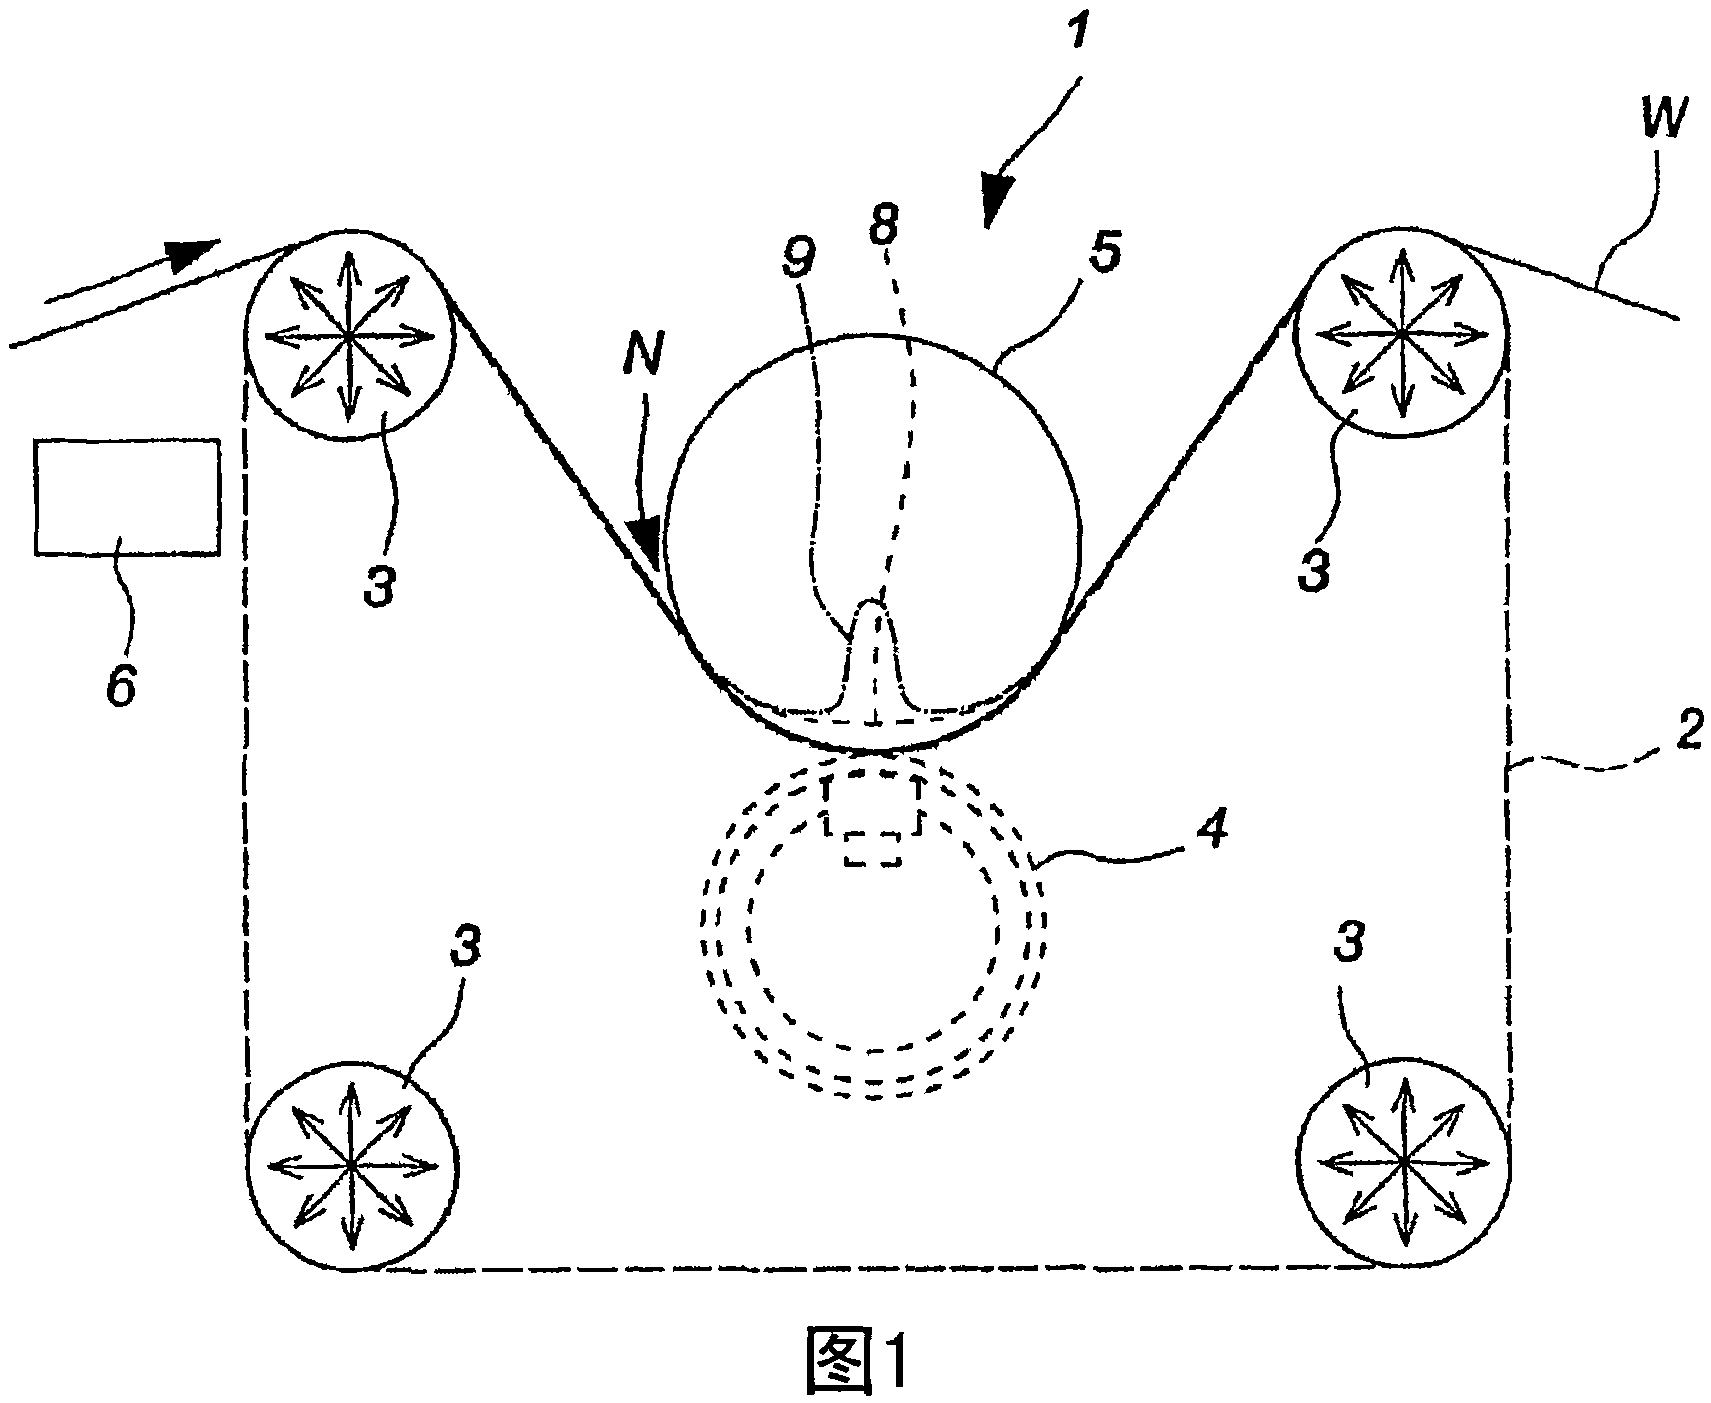 Method of and equipment for manufacturing a fibrous web formed at high consistency